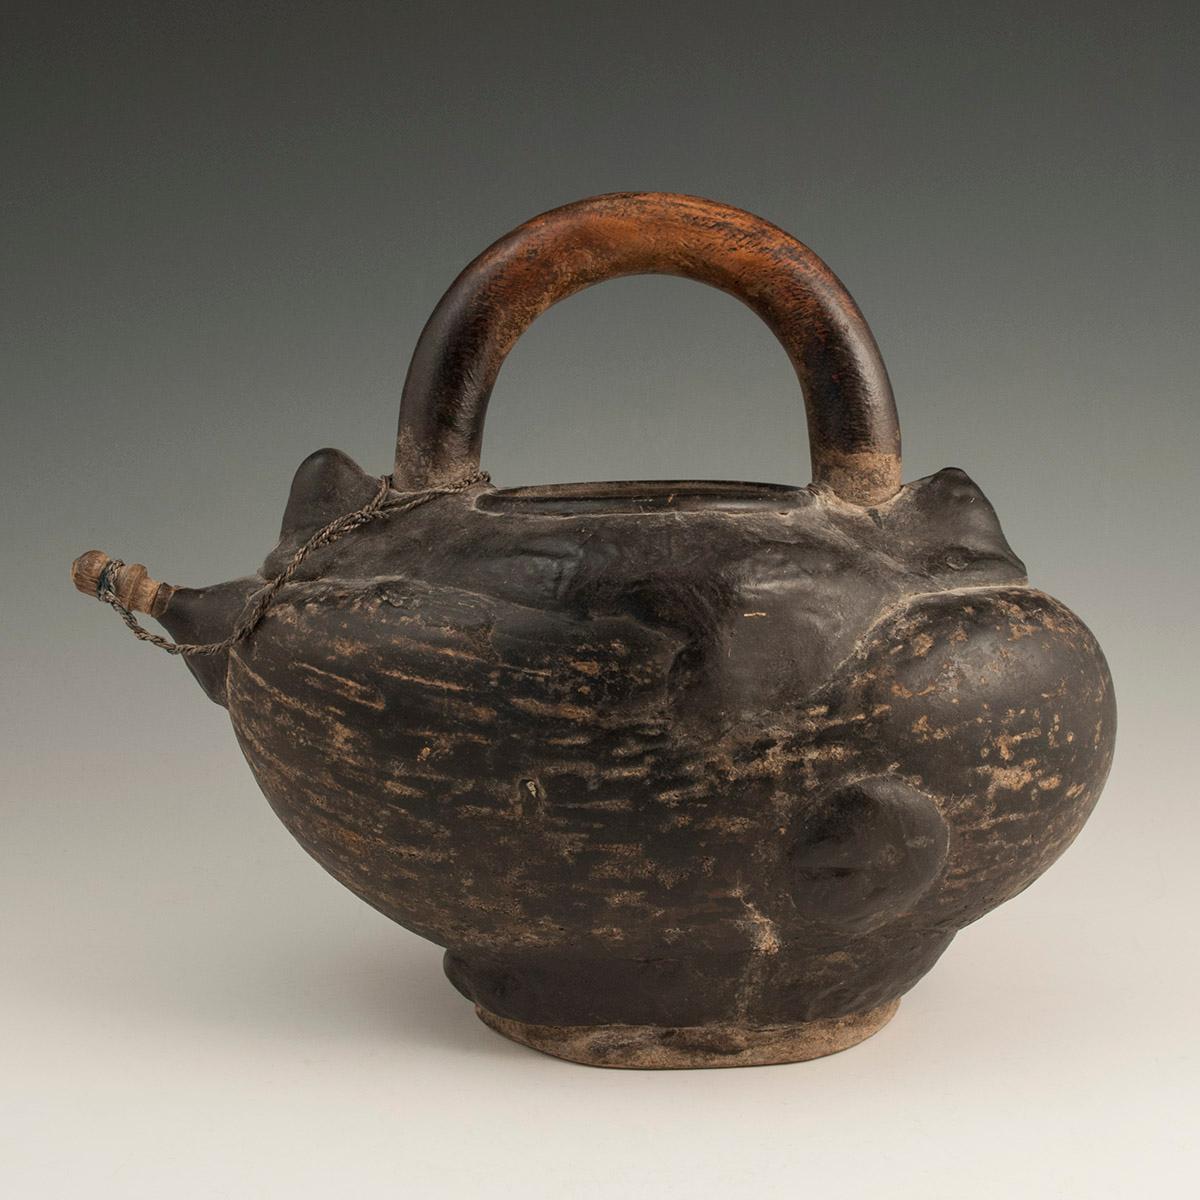 Late 19th-early 20th century tribal sadhu's Coco de Mer Kashkul, India.

A classic, well-worn coco de mer kashkul for carrying water, used by sadhus in India. This one has a wooden handle, spout and blobs of resin for water tightness. It lists a bit